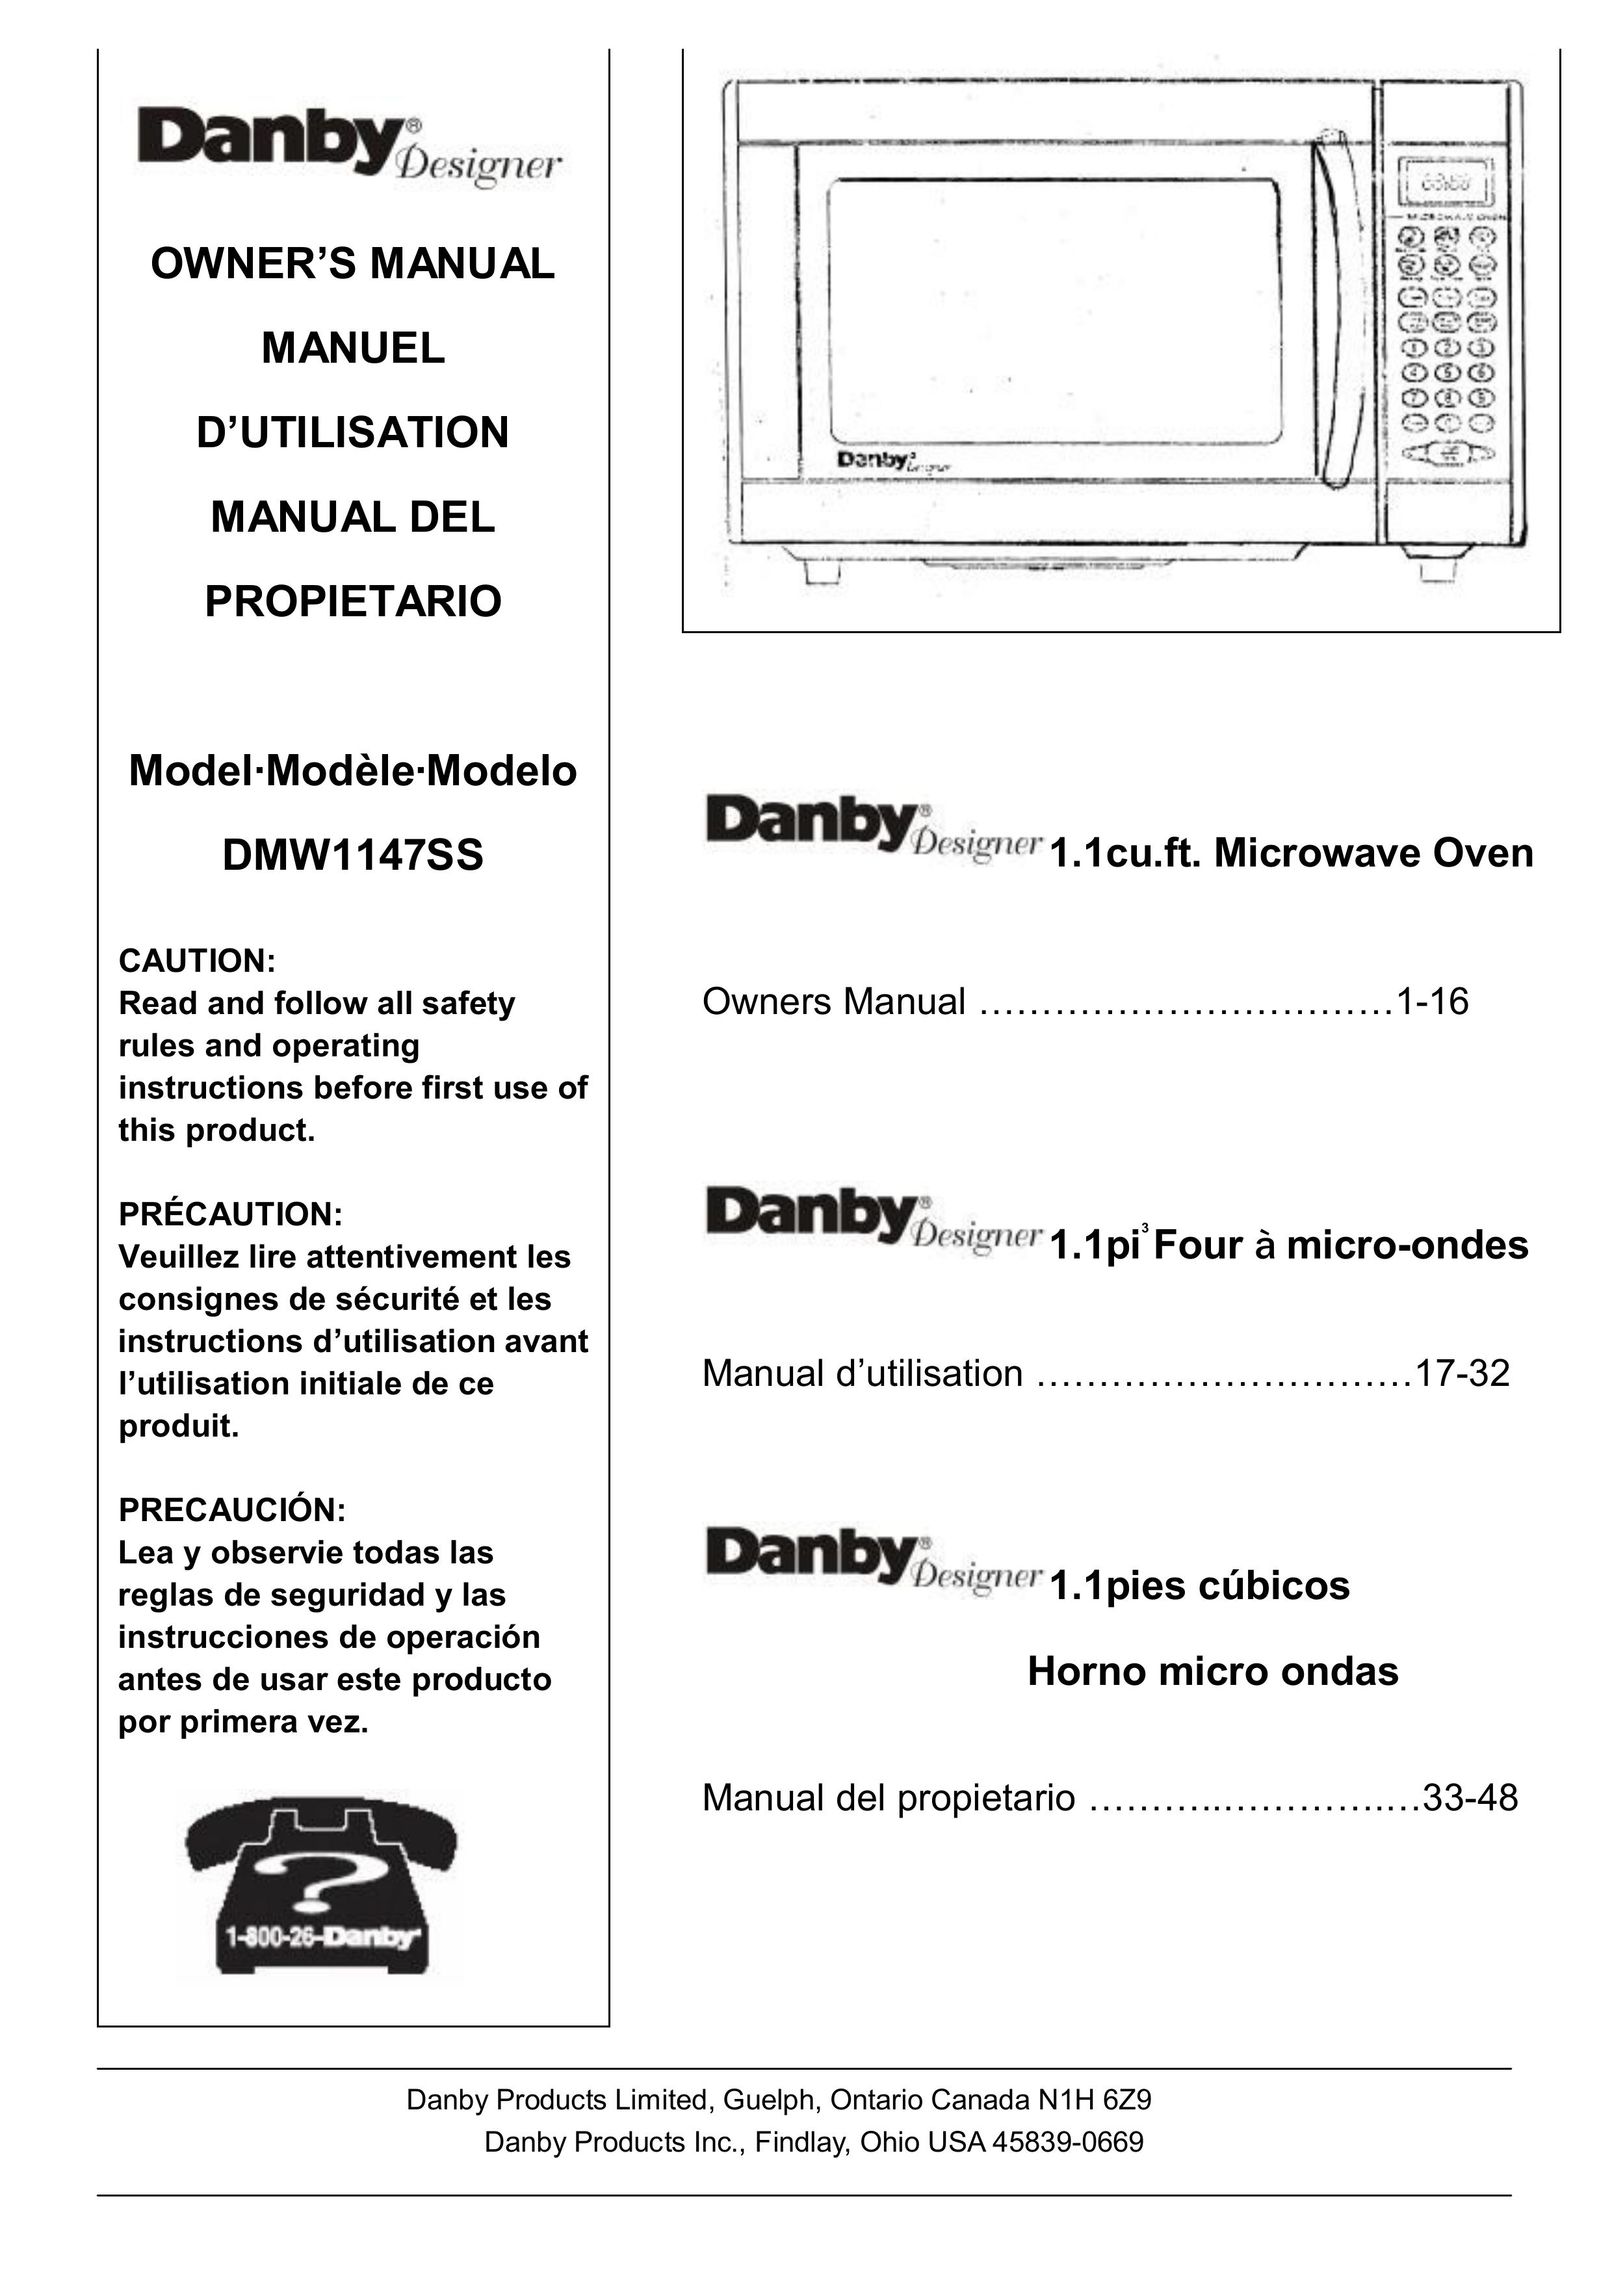 Danby DMW1147SS Microwave Oven User Manual